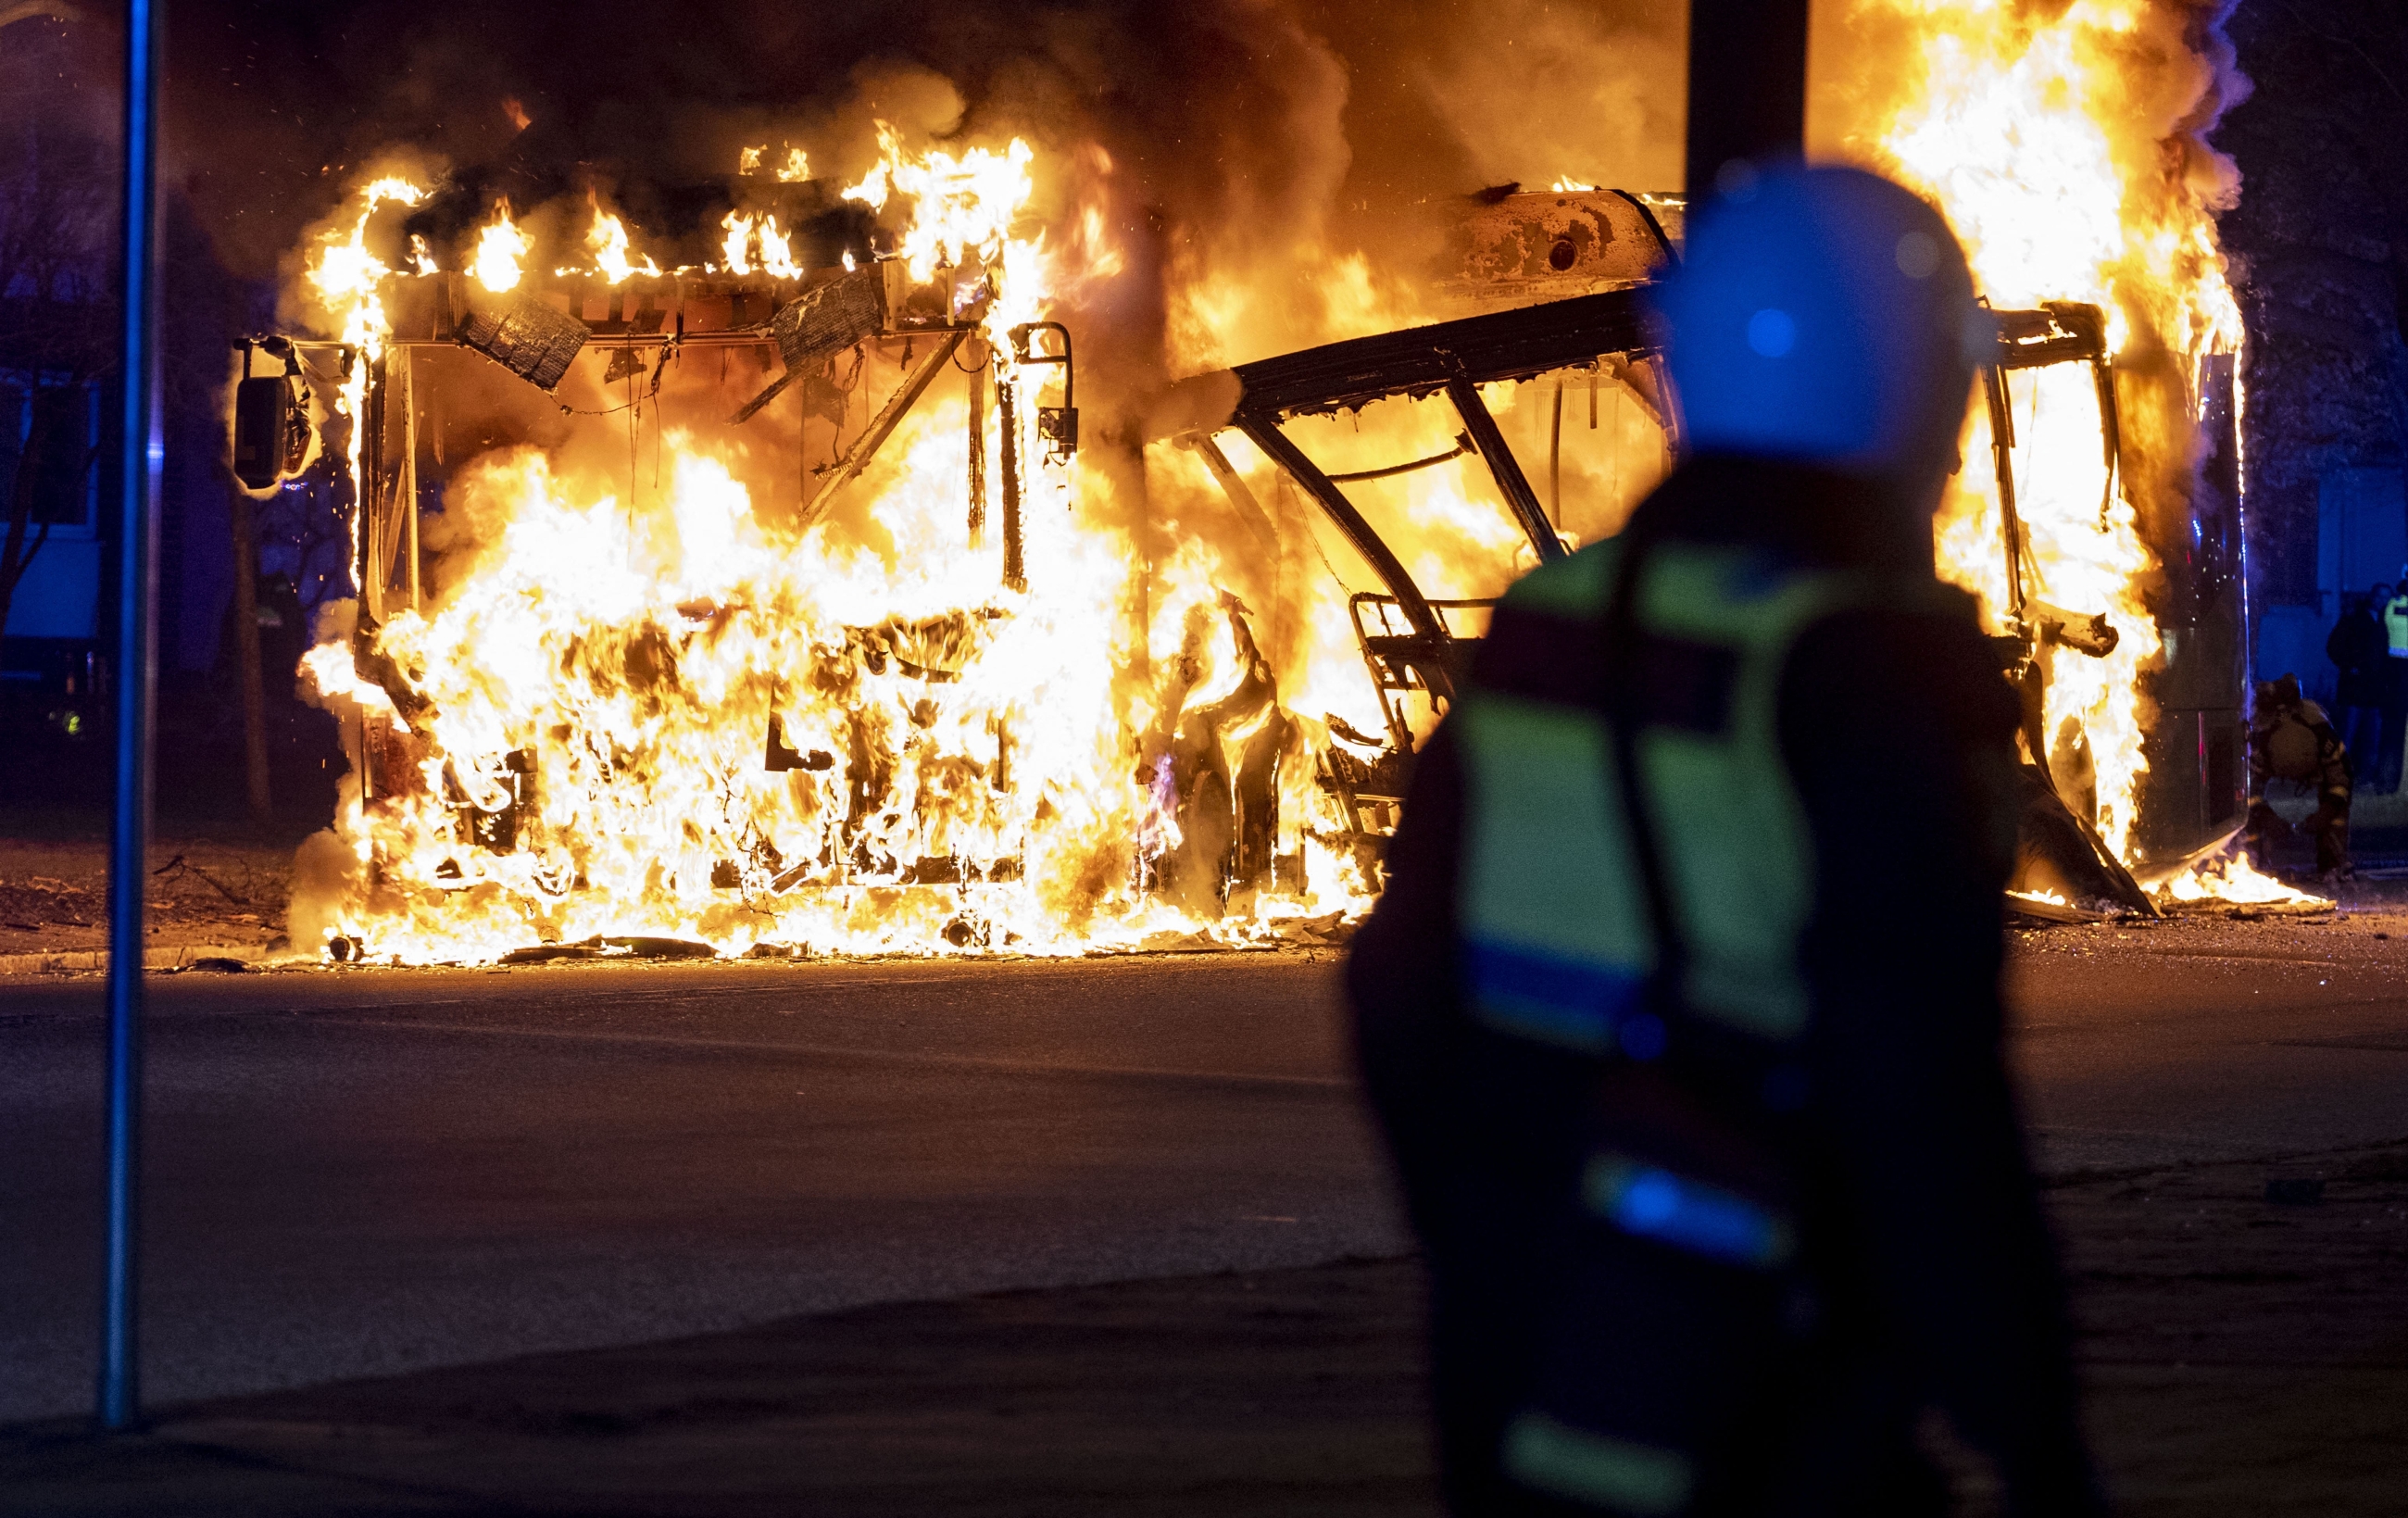 An anti-riot police officer watches a city bus burning in Malmo on 16 April 2022 (AFP)